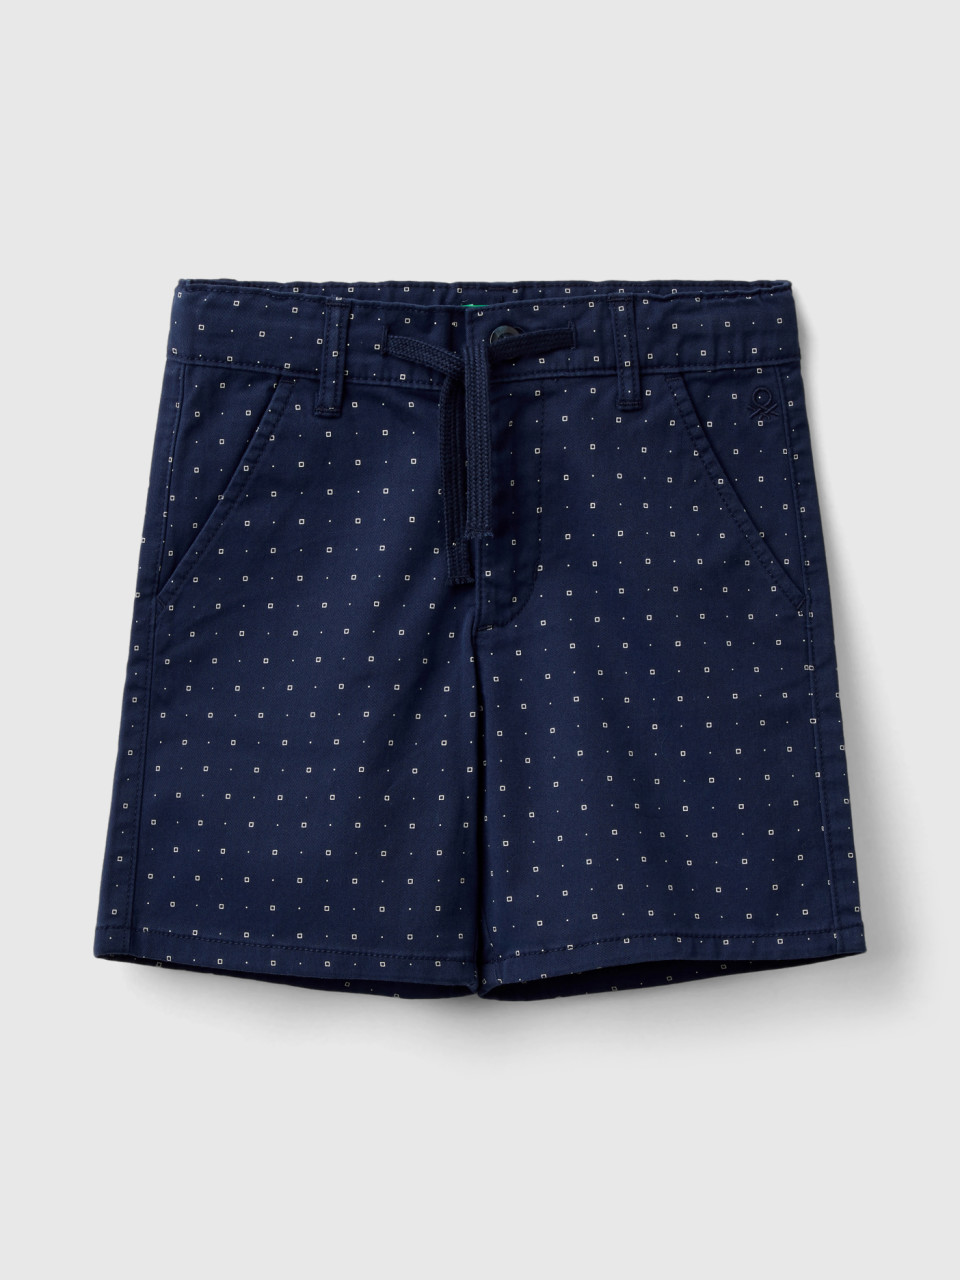 Benetton, Micro Patterned Shorts With Drawstring, Dark Blue, Kids